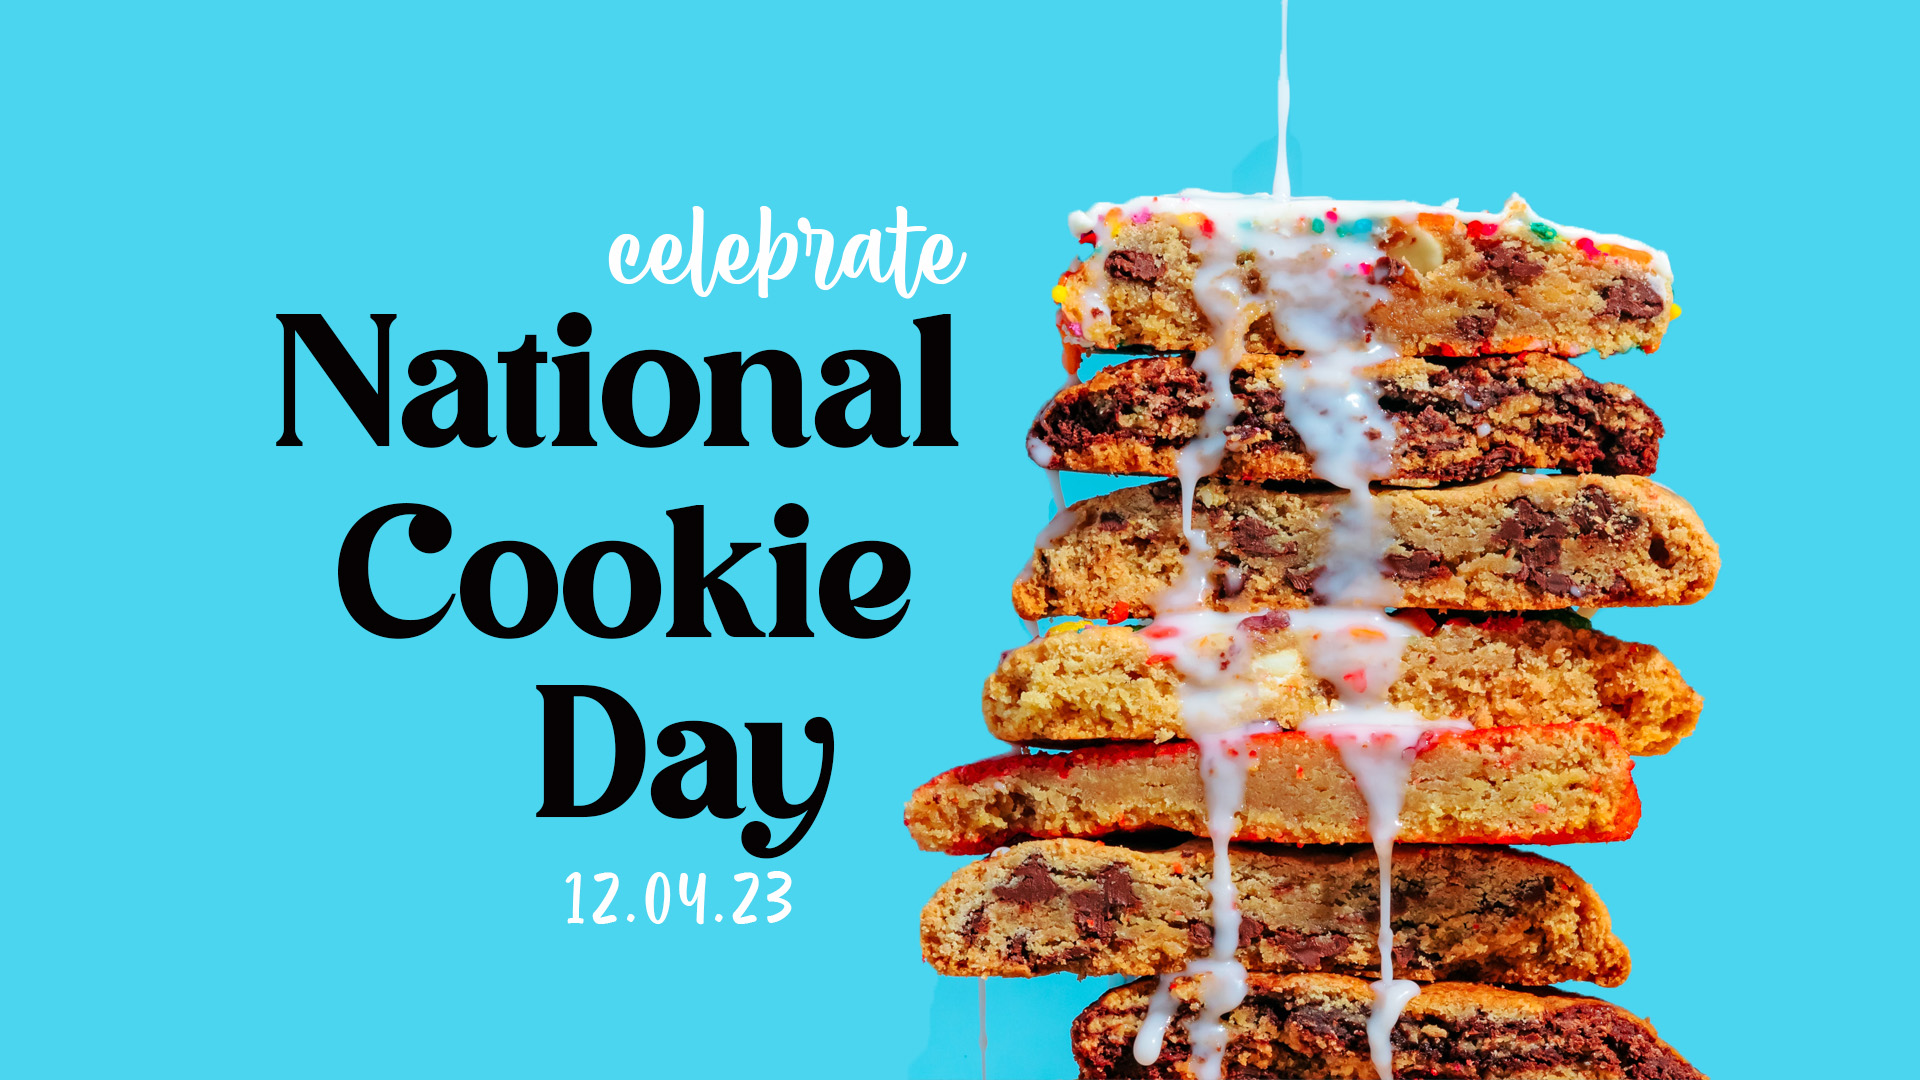 A stack of cookies on the right of the page with white frosting being drizzled on top of them. On the left side of the graphic celebrate National Cookie Day is spelt out in a thick rounded font.